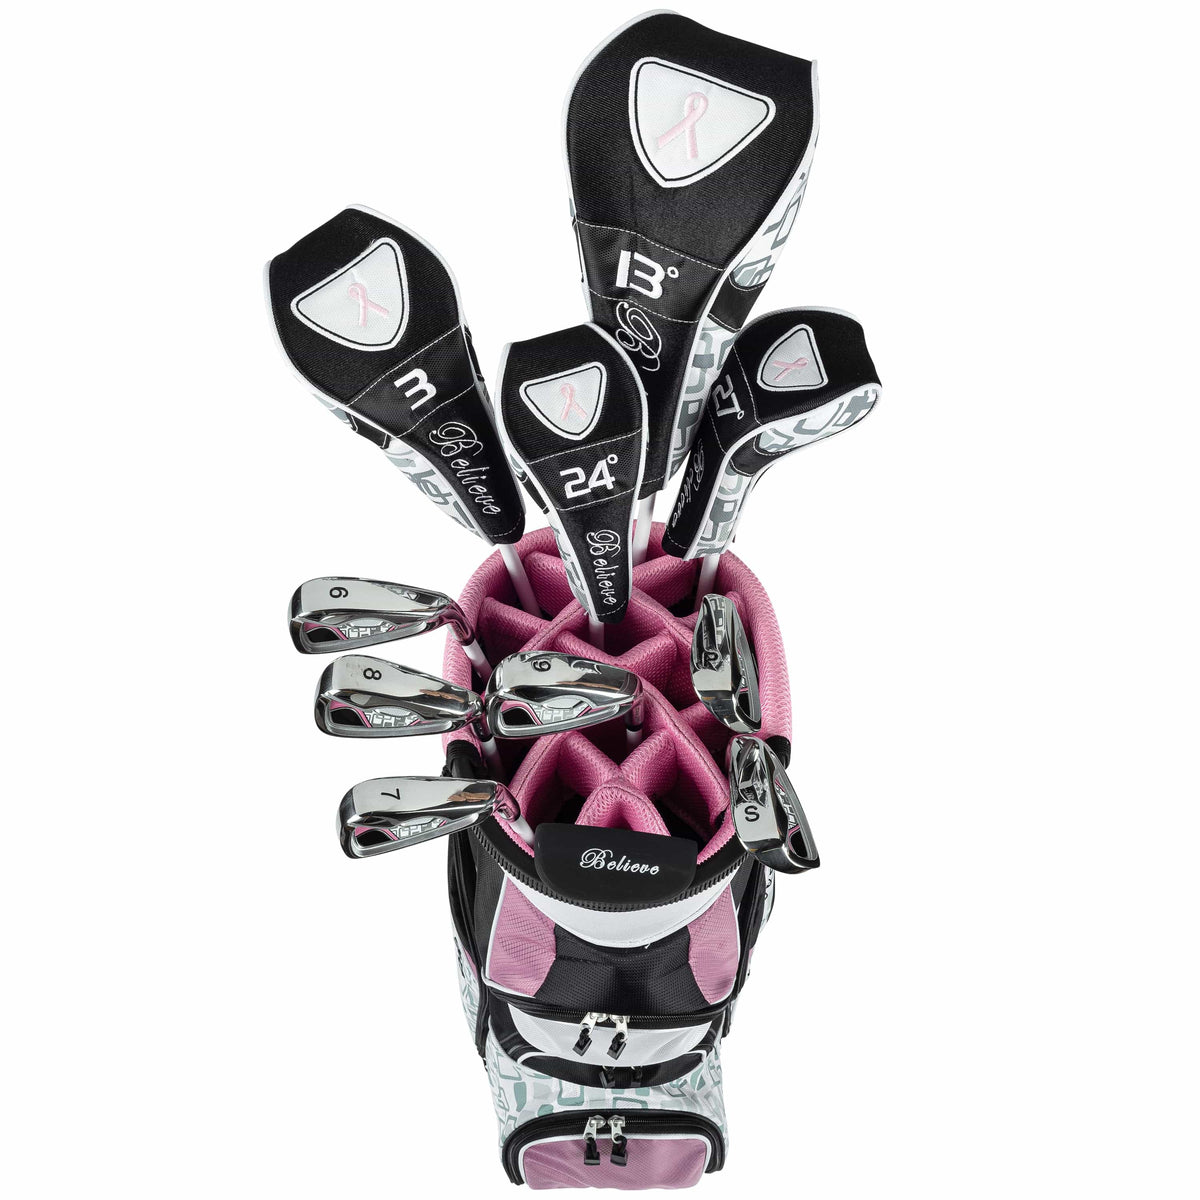 Founders Club Believe Complete Ladies Golf Set - ROSE (Right-handed)